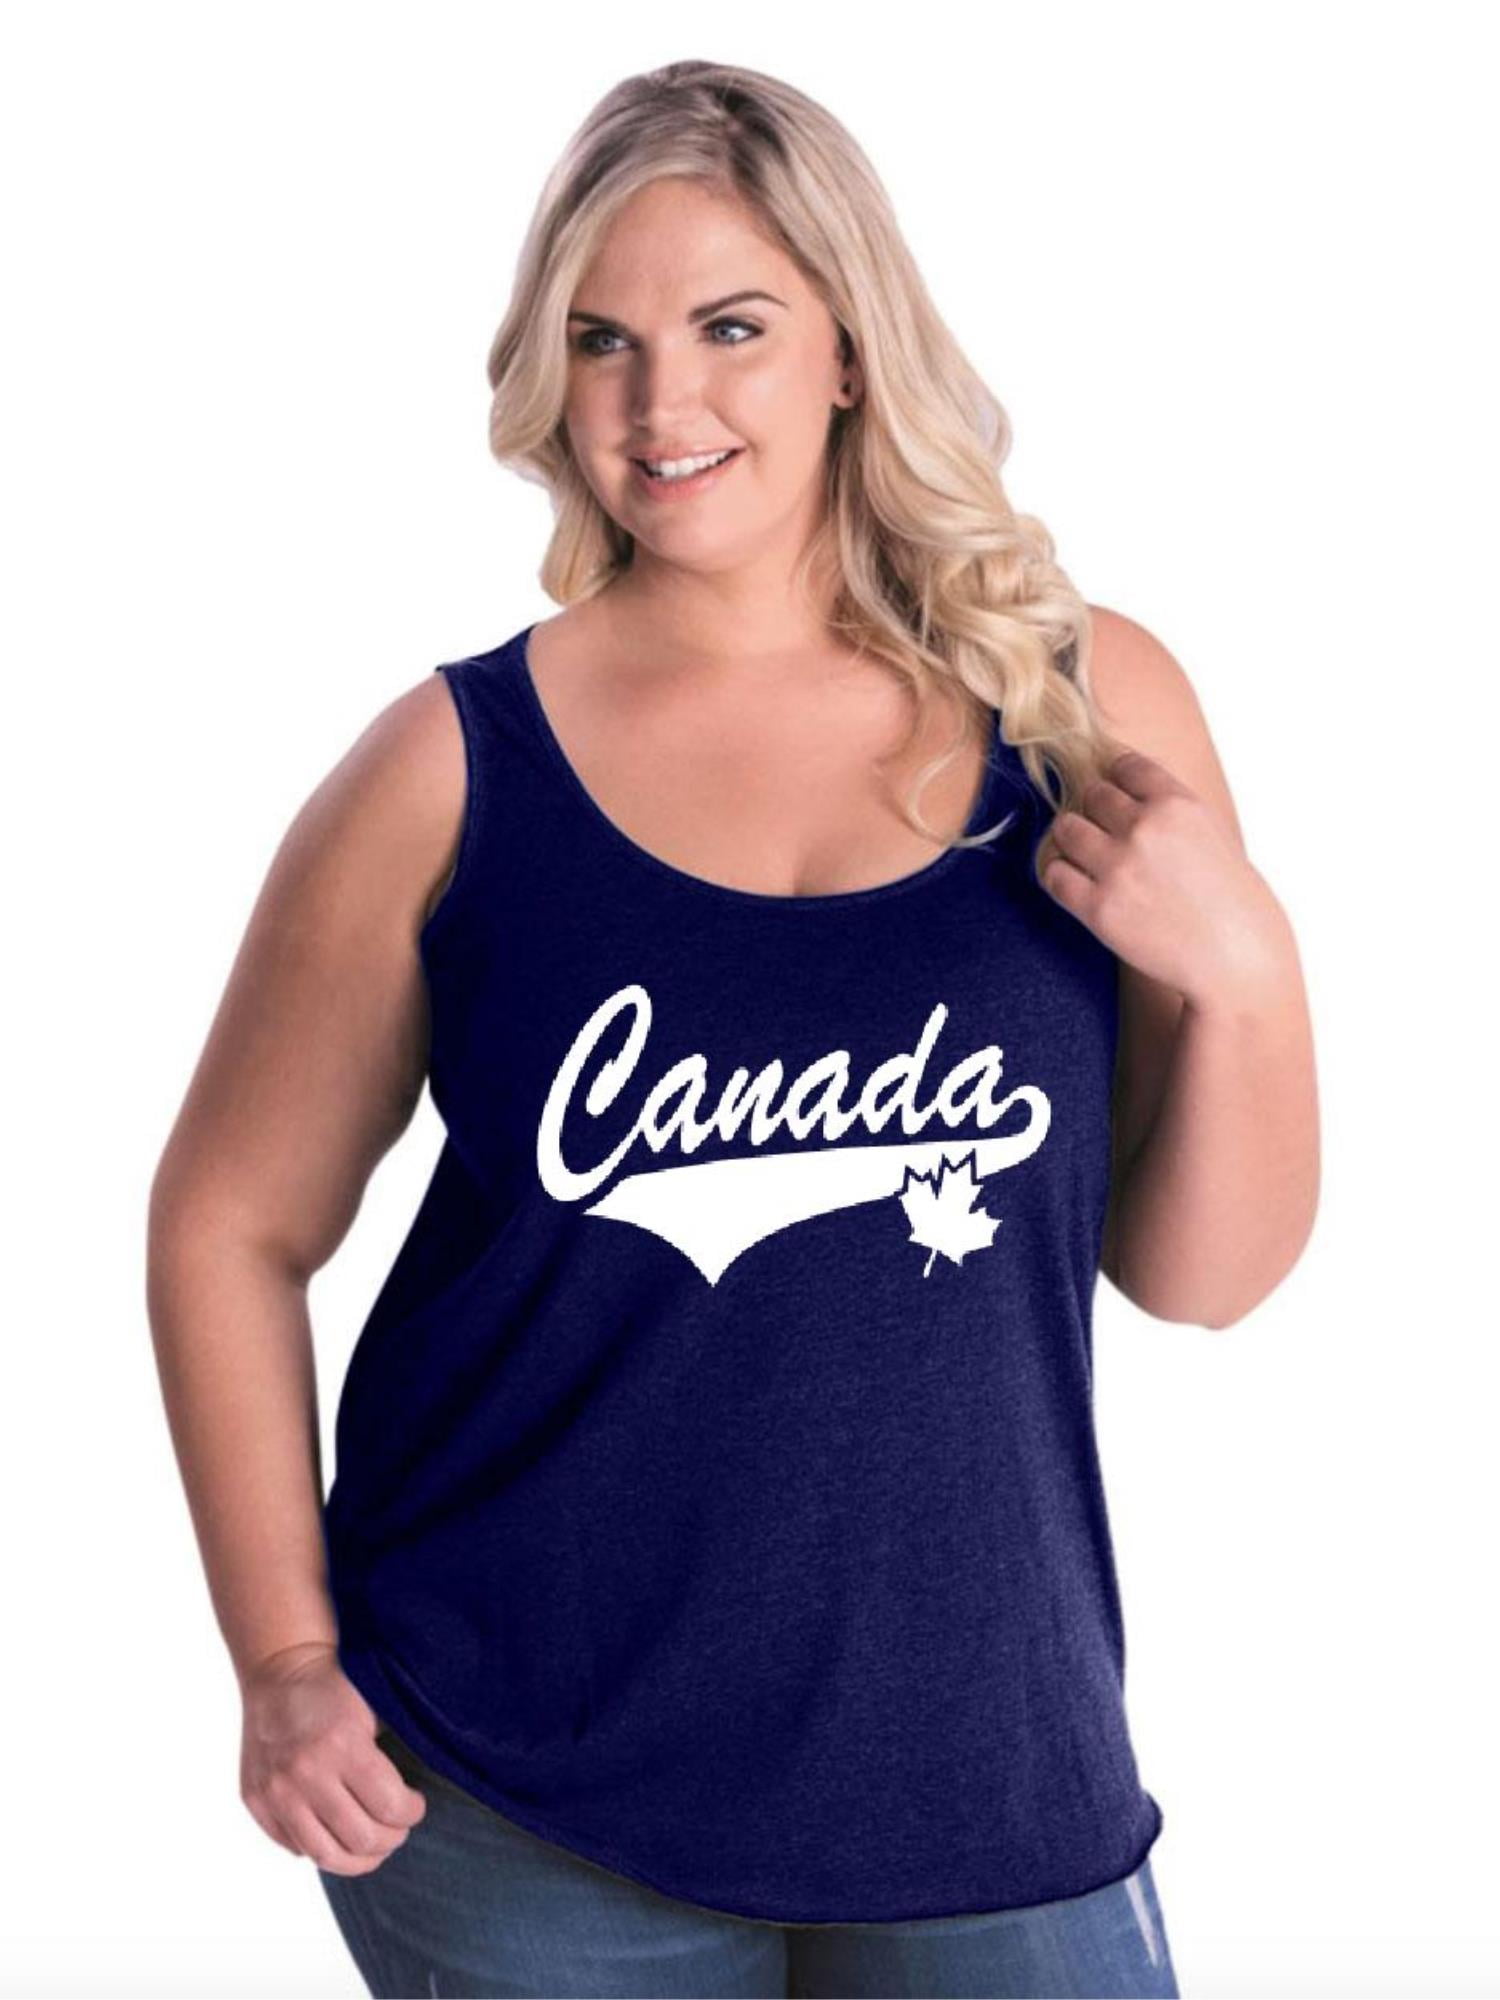 IWPF - Women's Plus Size Tank Top, up to Size 28 - Canada Leaf 